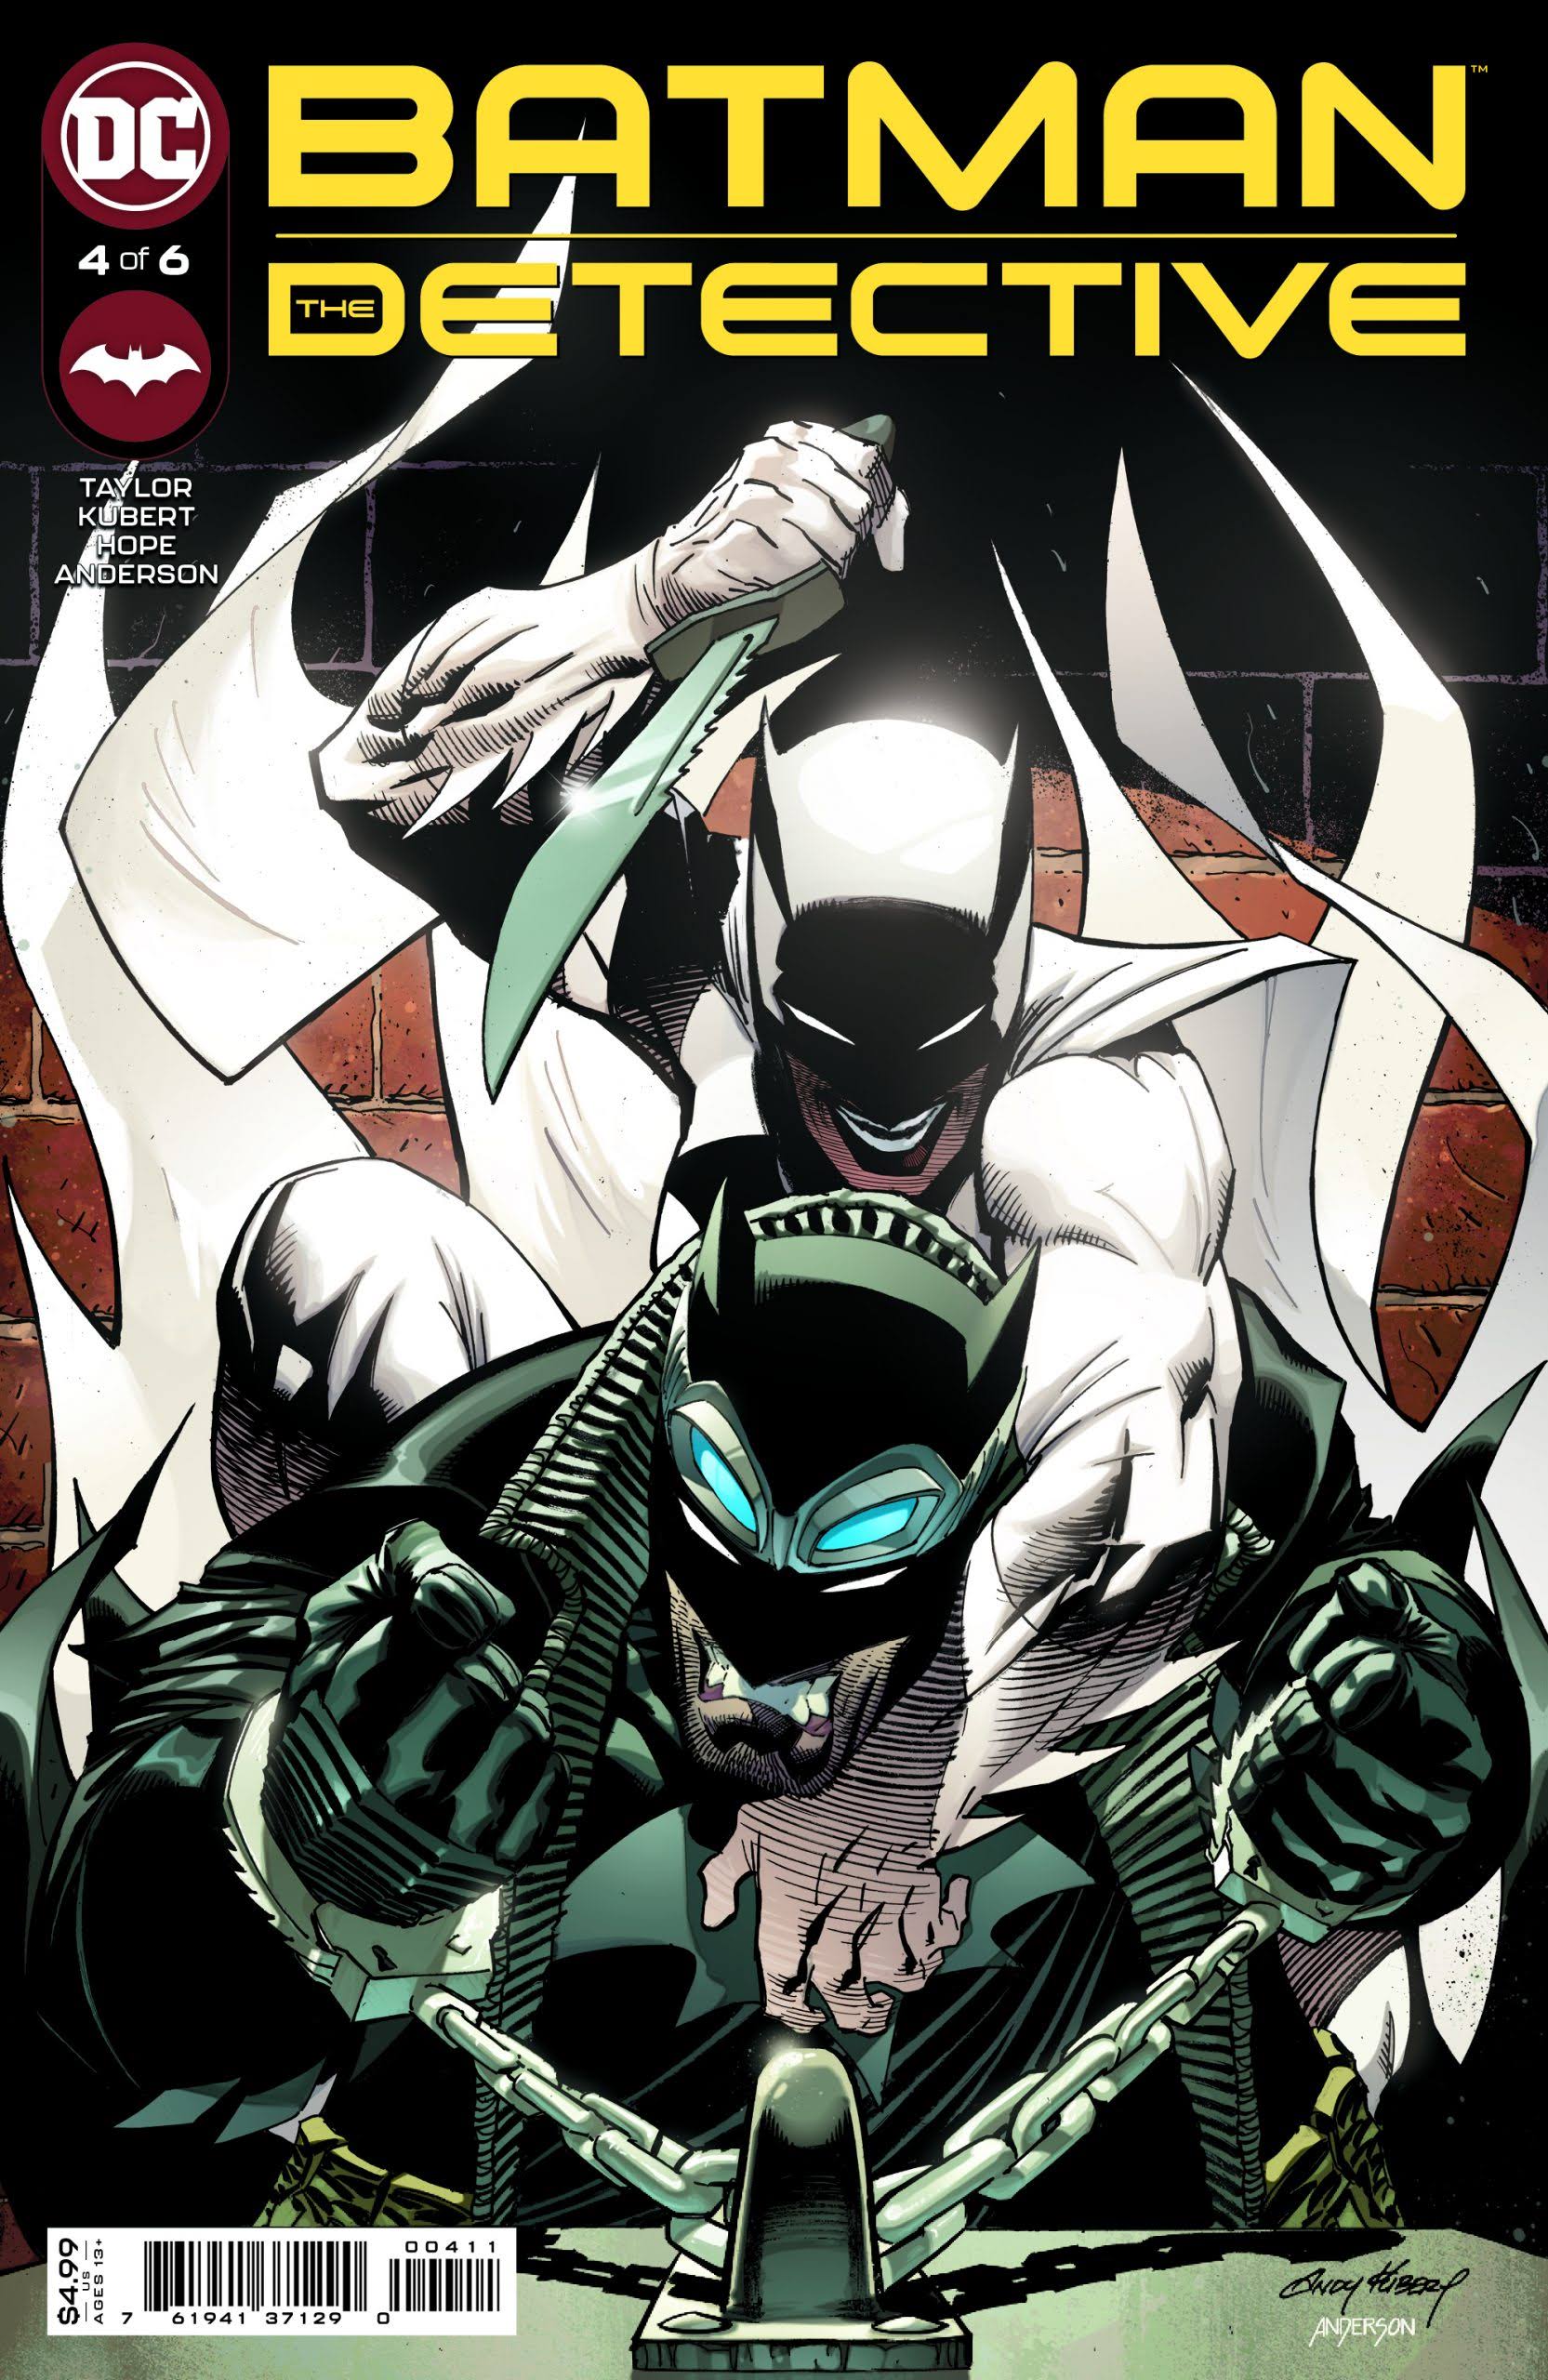 Batman The Detective #3 (OF 6) Cover A Andy Kubert